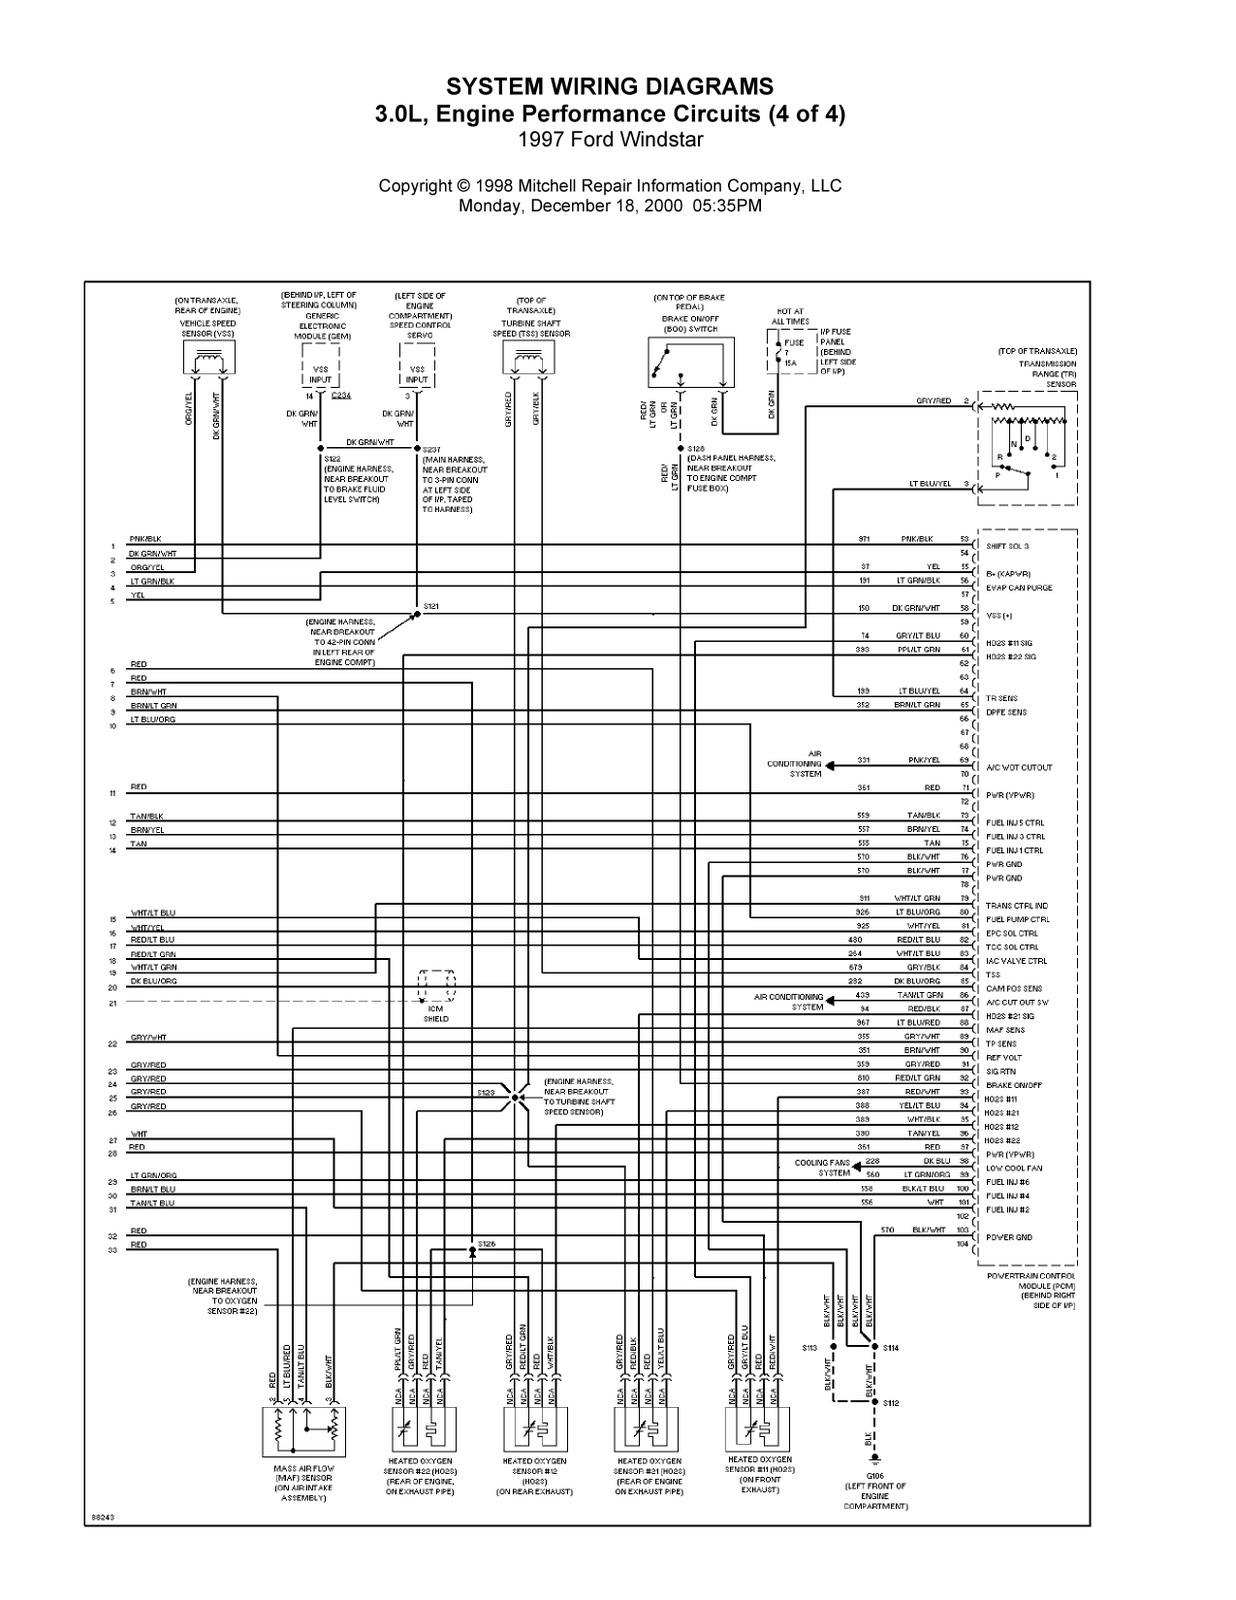 1997 Ford Windstar Complete System Wiring Diagrams